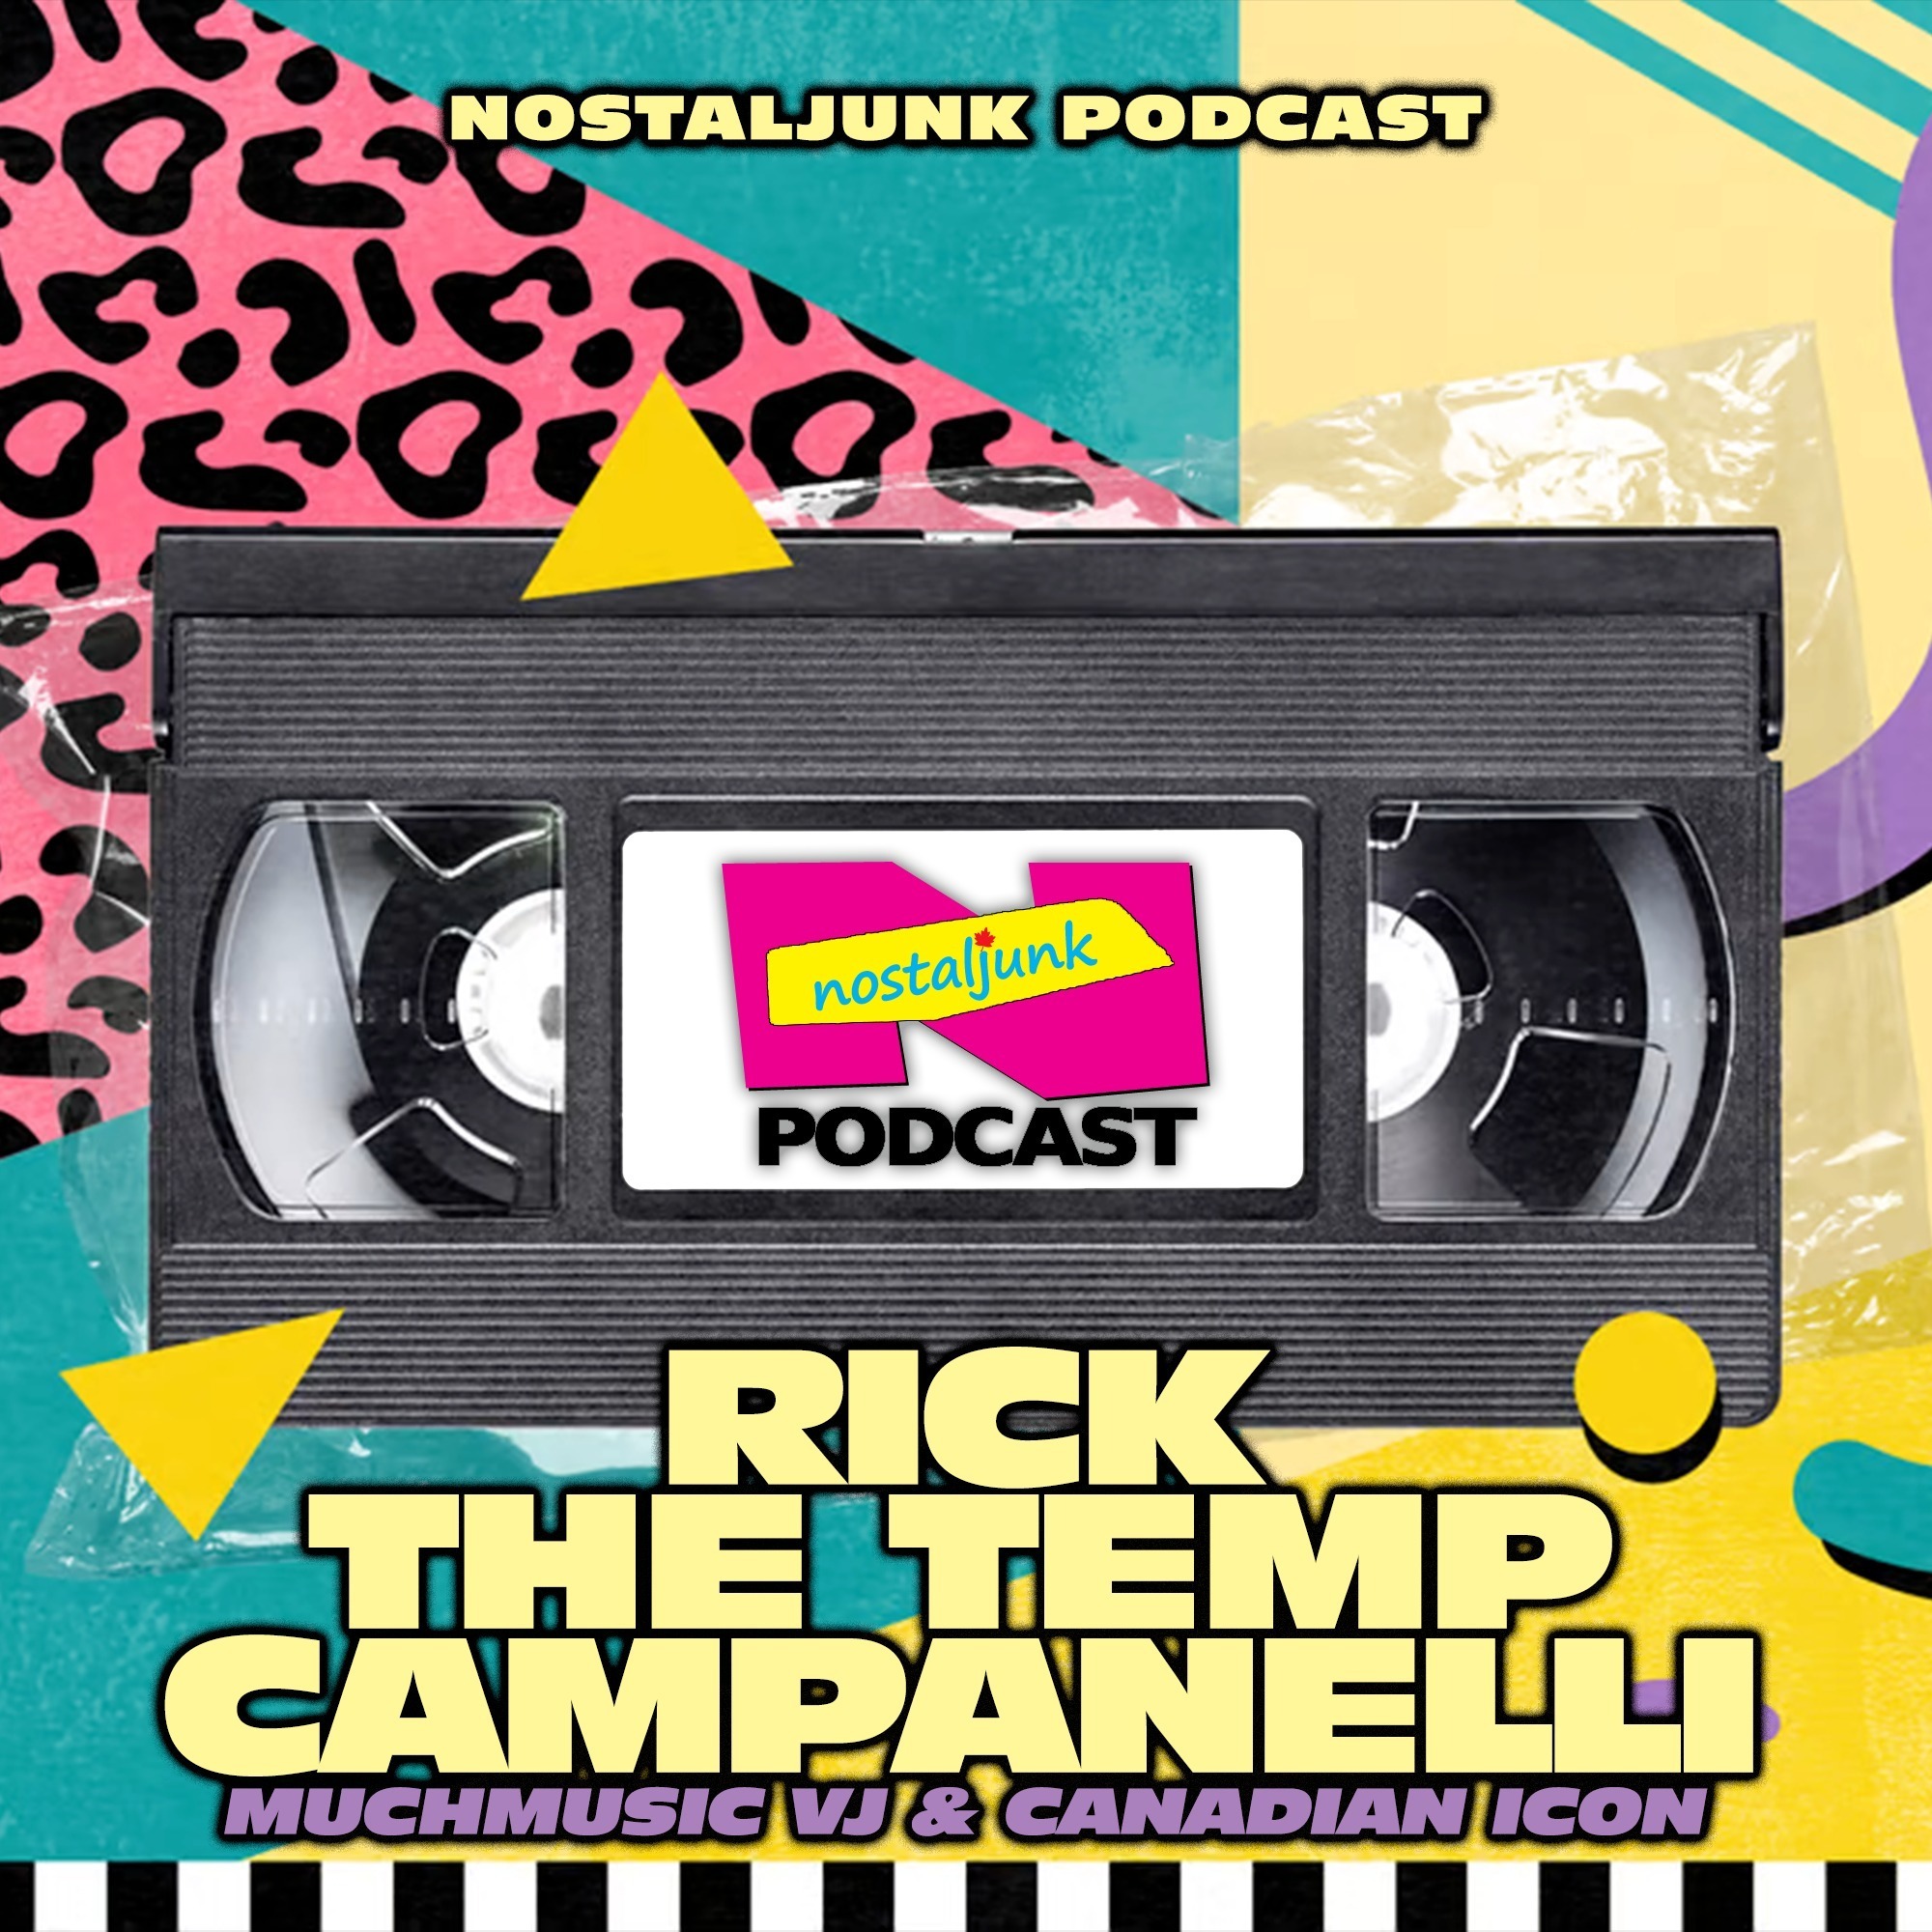 Interview with RICK THE TEMP CAMPANELLI | 90s MuchMusic